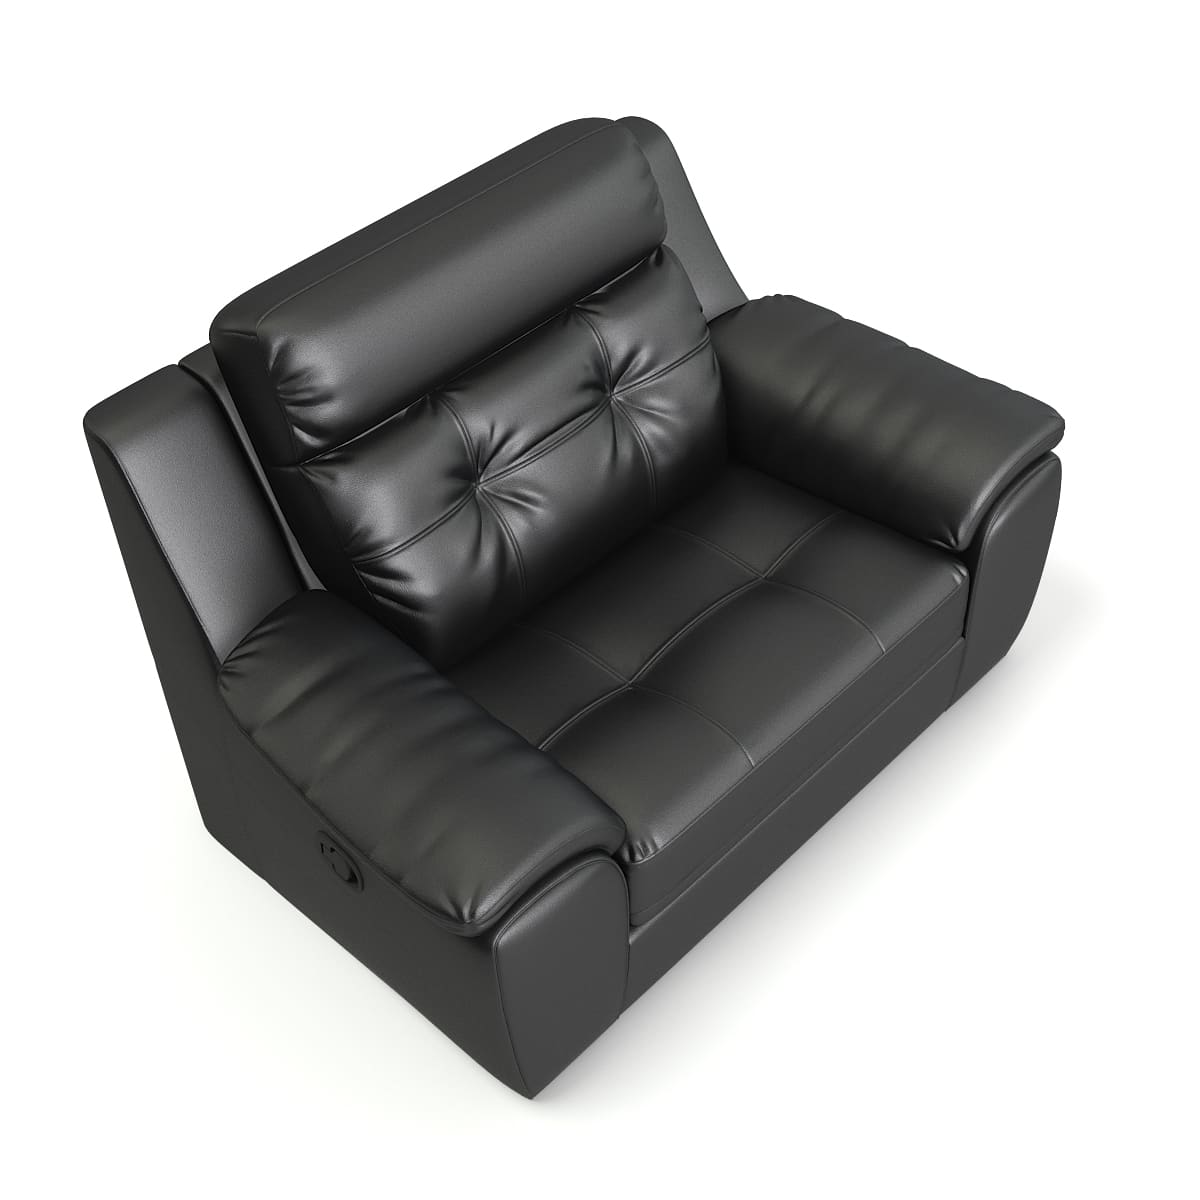 Black Leather Armchair 3D Model (9721) - CGAxis - 3D models, PBR